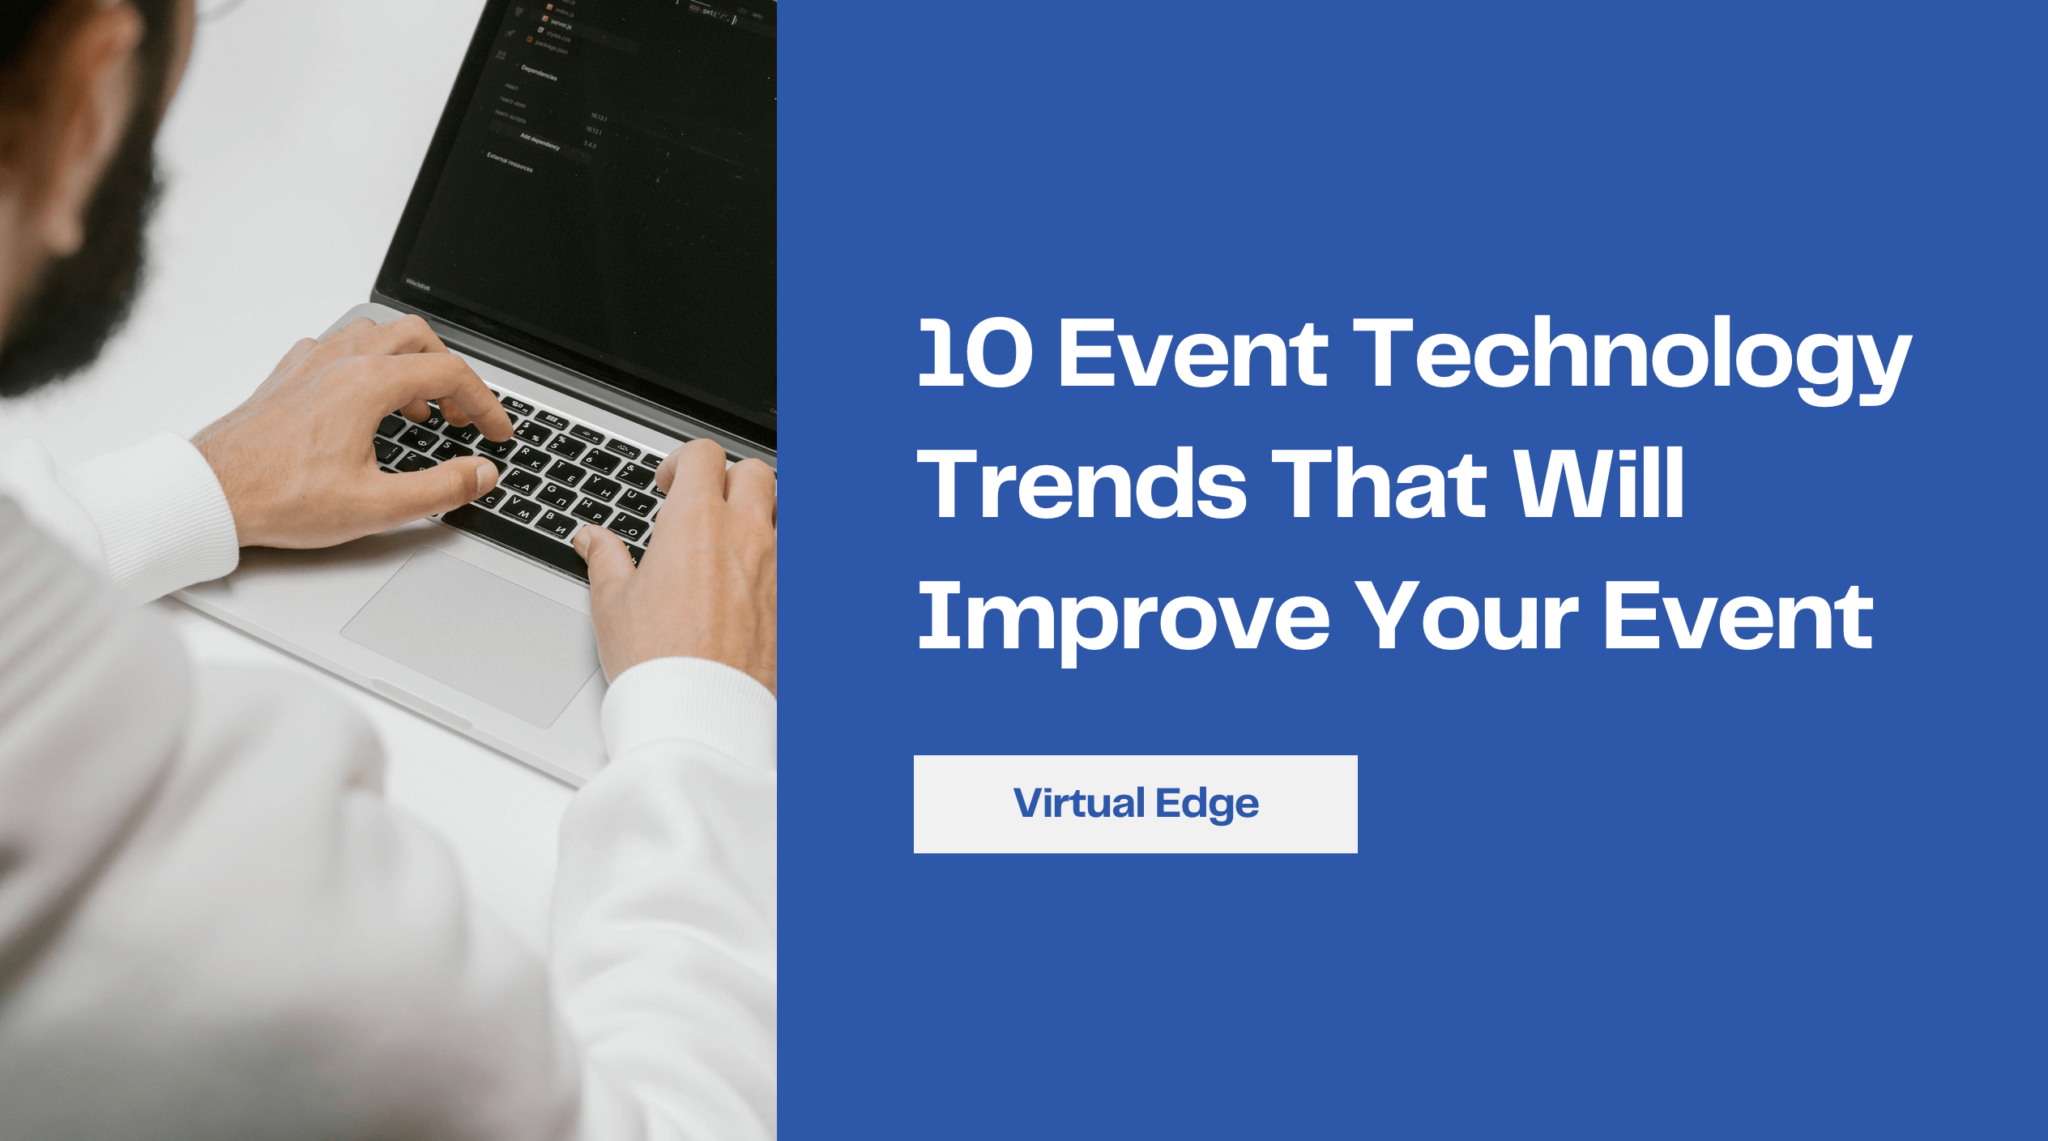 10 Event Technology Trends That Will Improve Your Event Virtual Edge